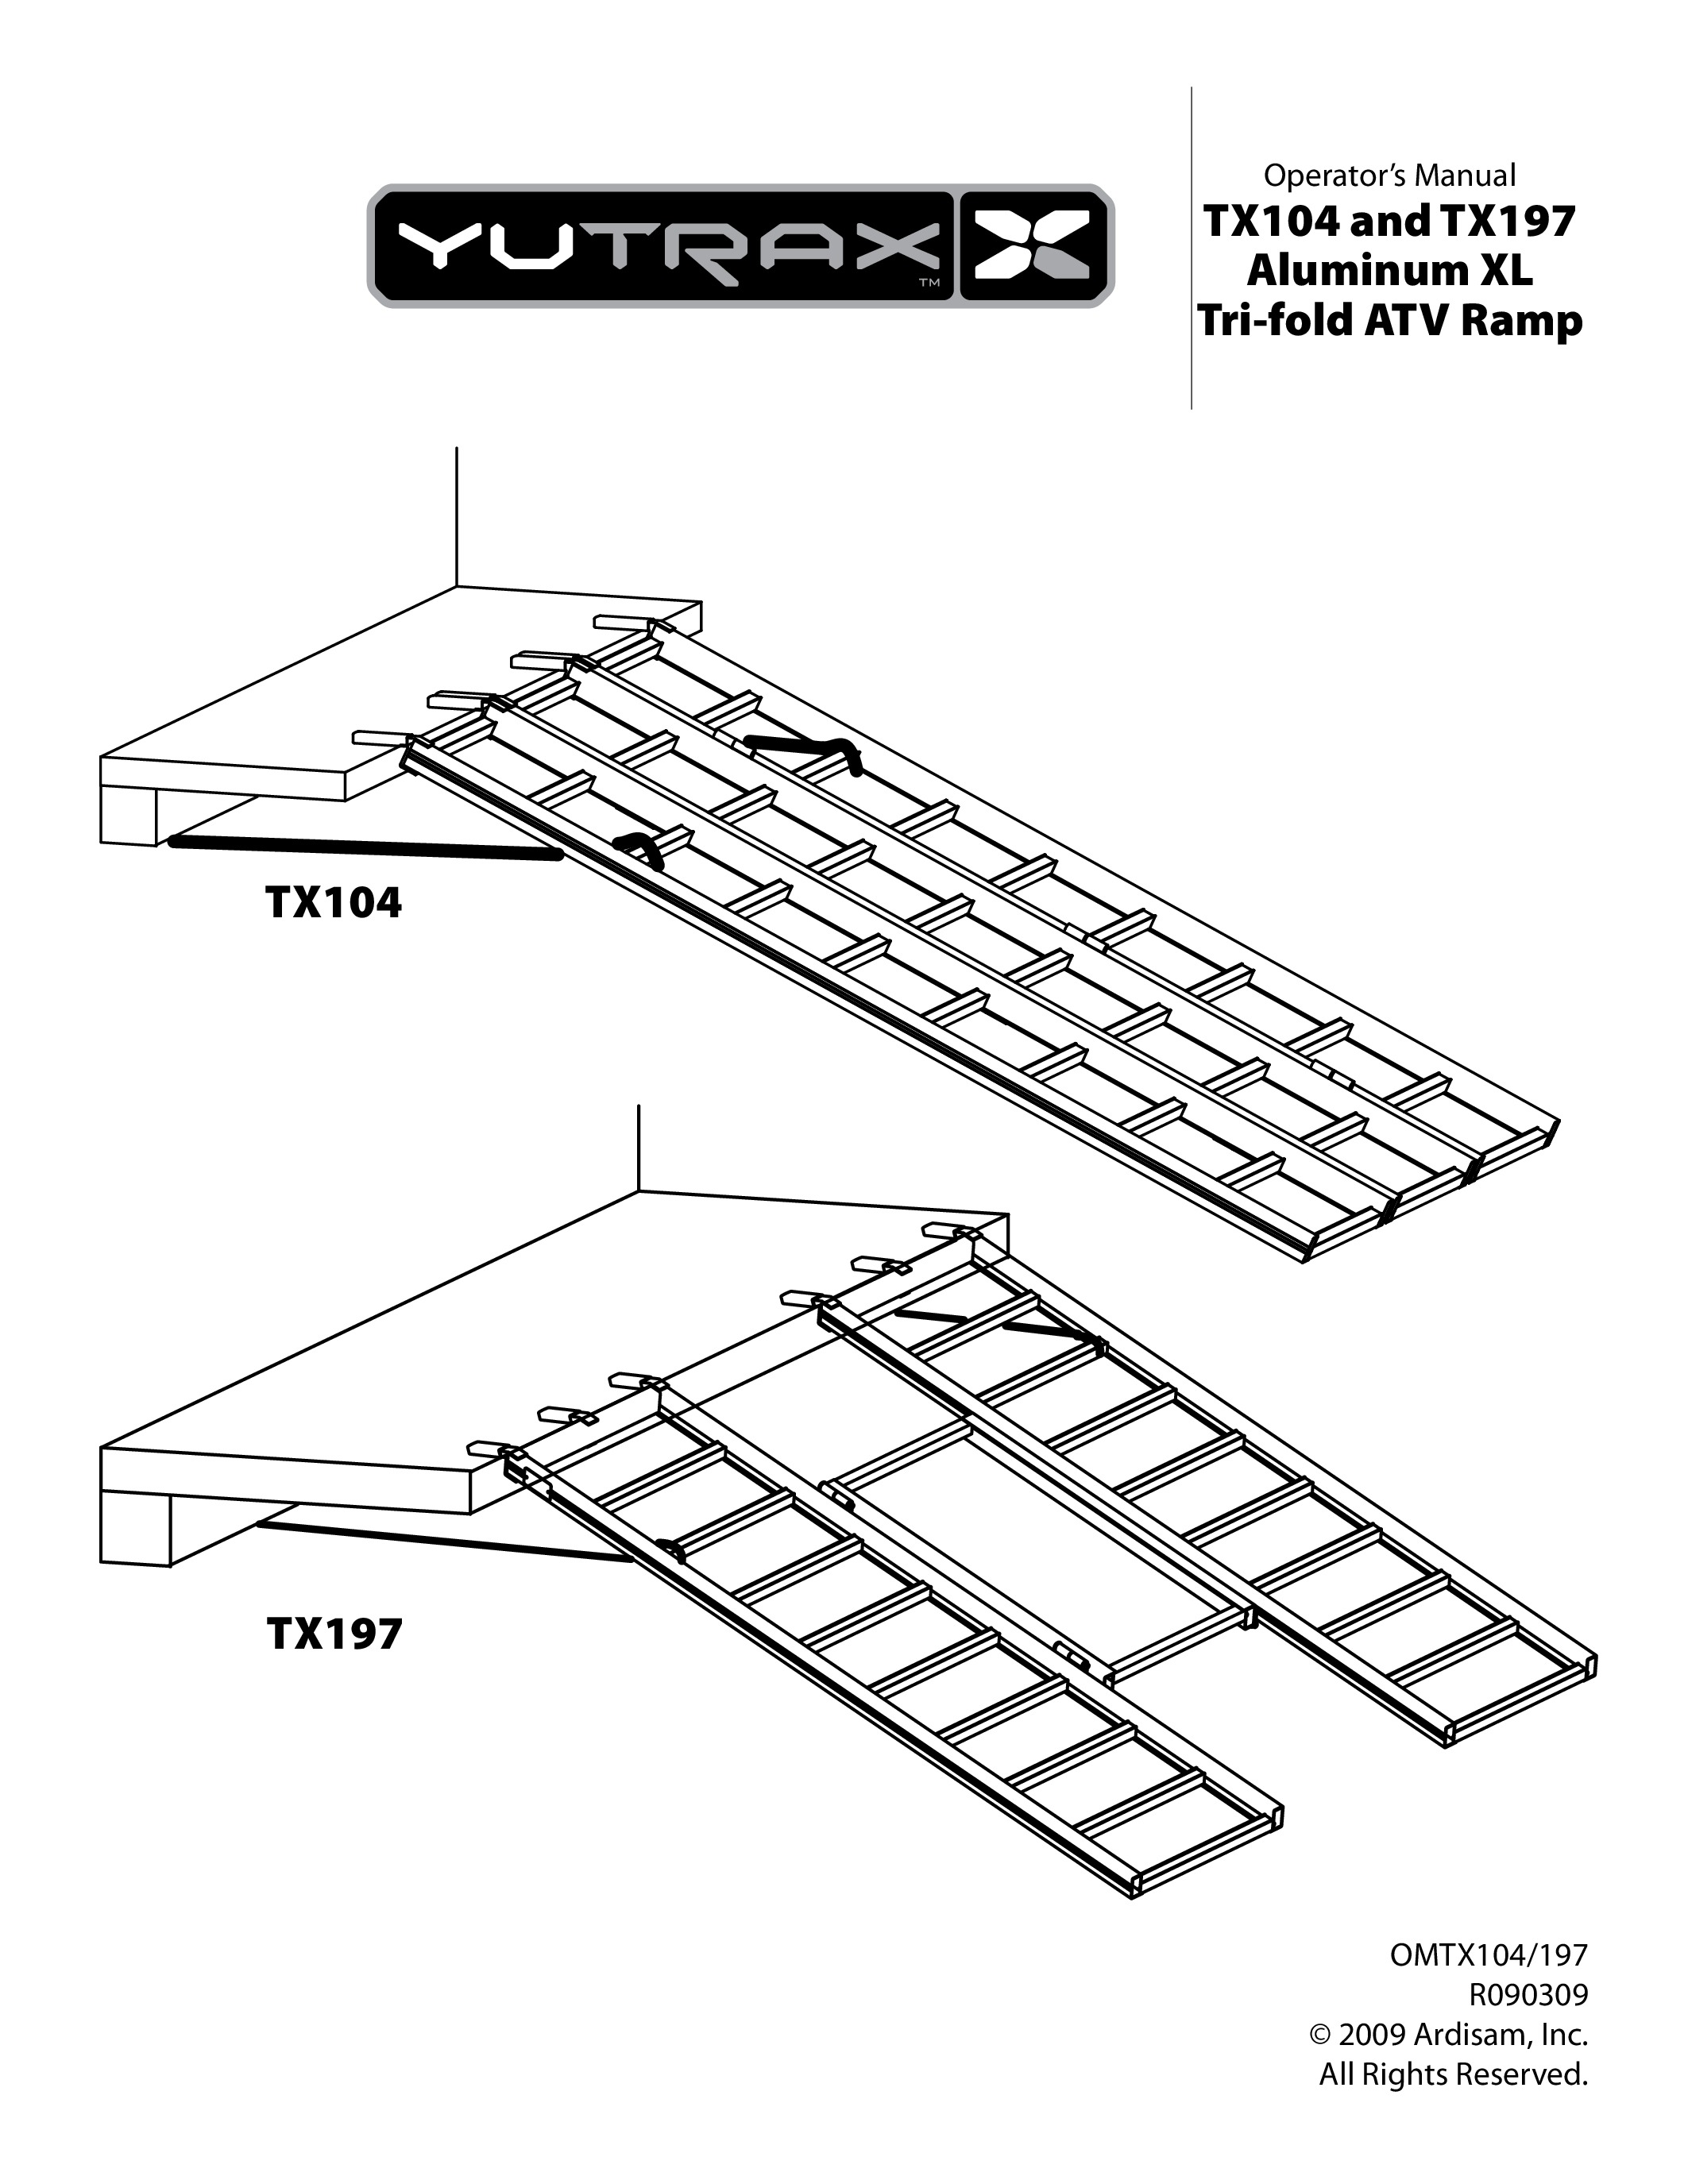 Tri Fold Loading Ramp - 50x69 - 69" Long, 50" Wide, Folds to 17.5" - 1750 Lbs capacity, weighs only 28 lbs. - Click Image to Close